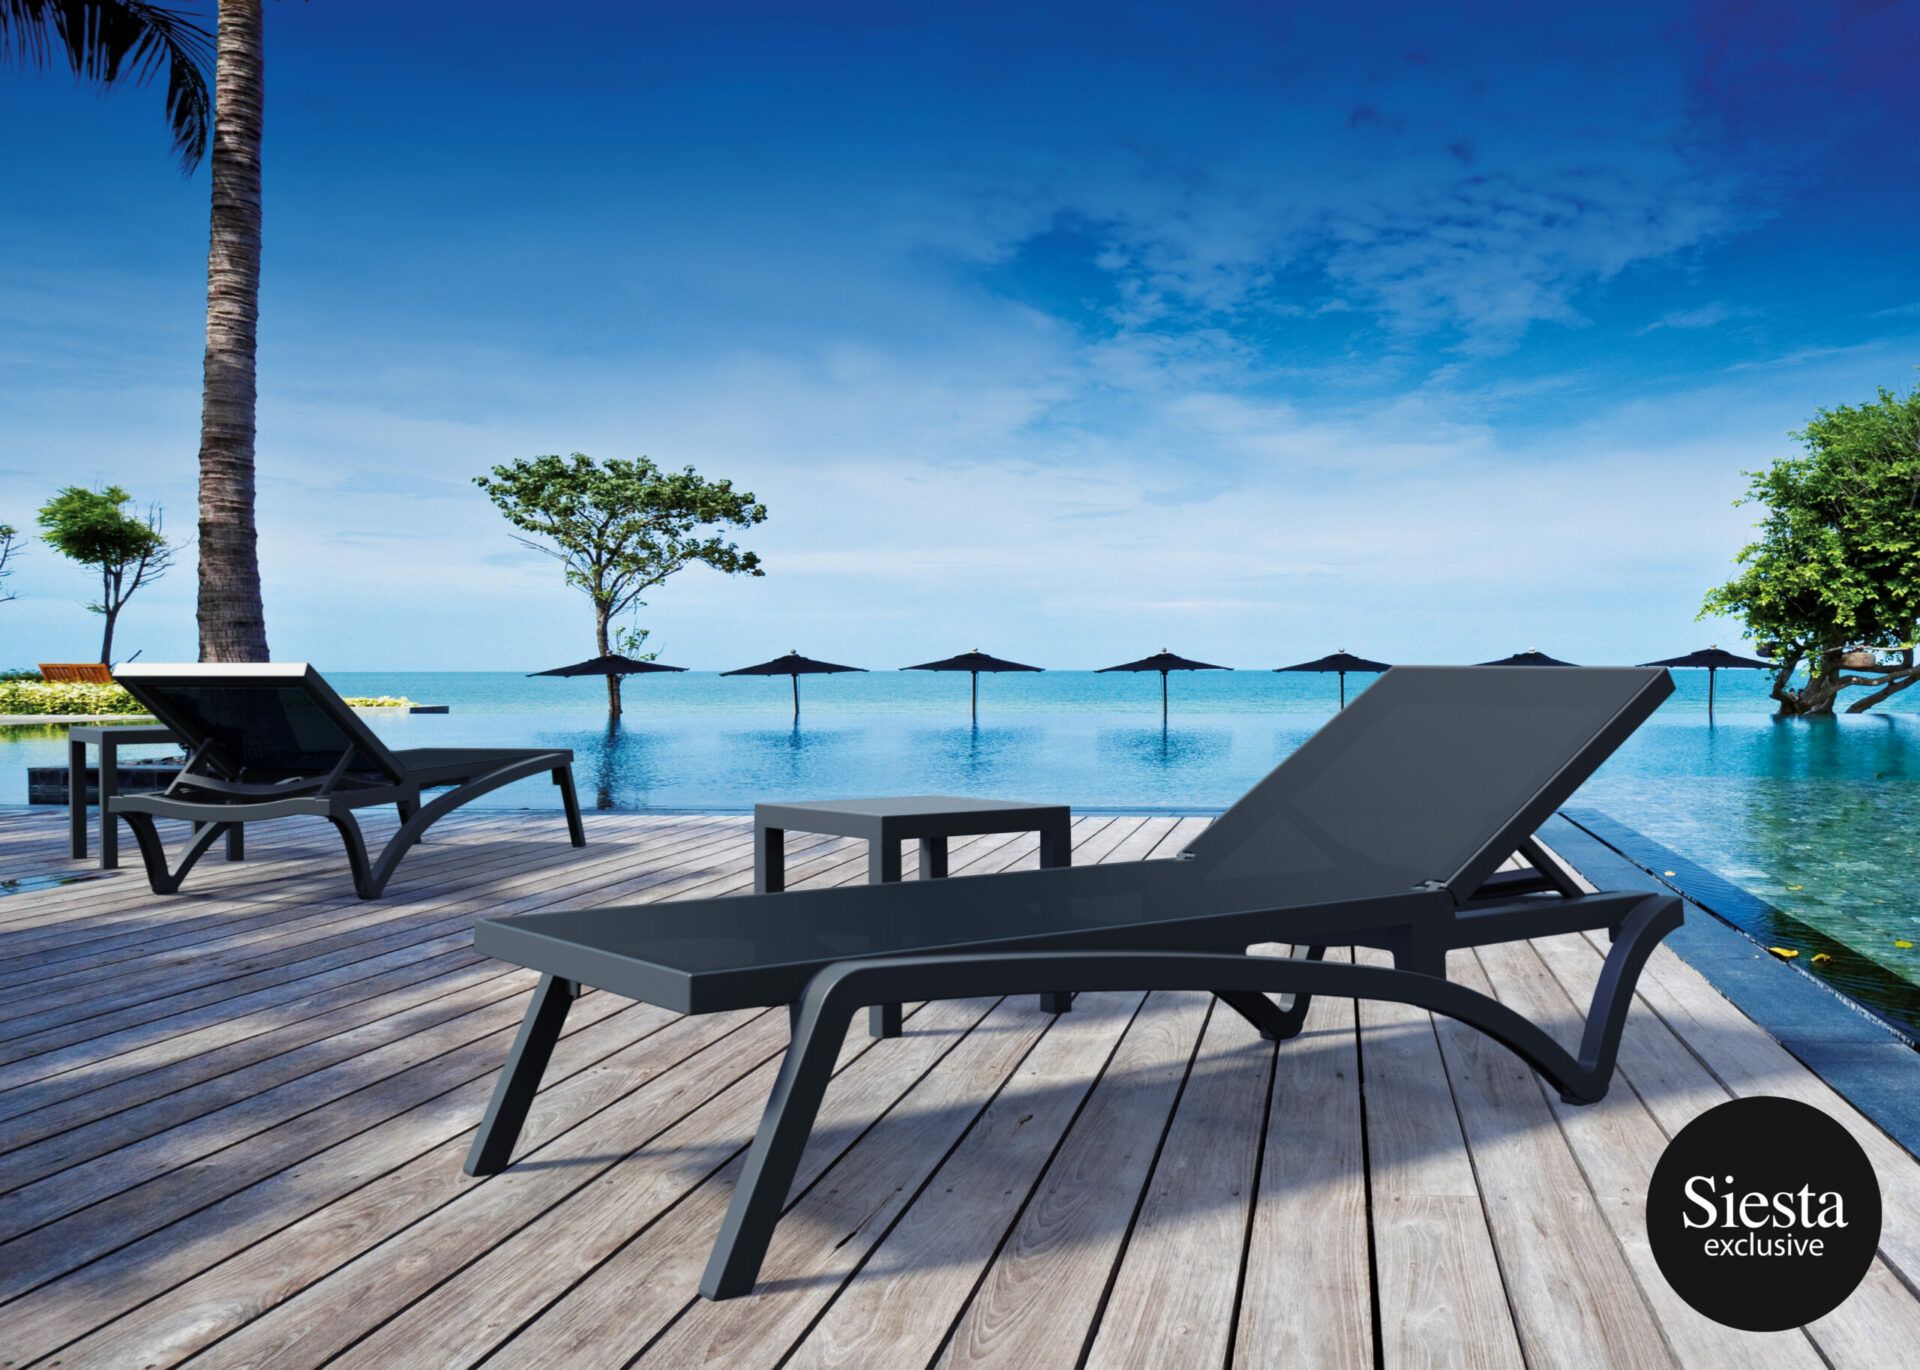 Pacific Sunlounger/Ocean Side Table 4 Pc Package - Anthracite